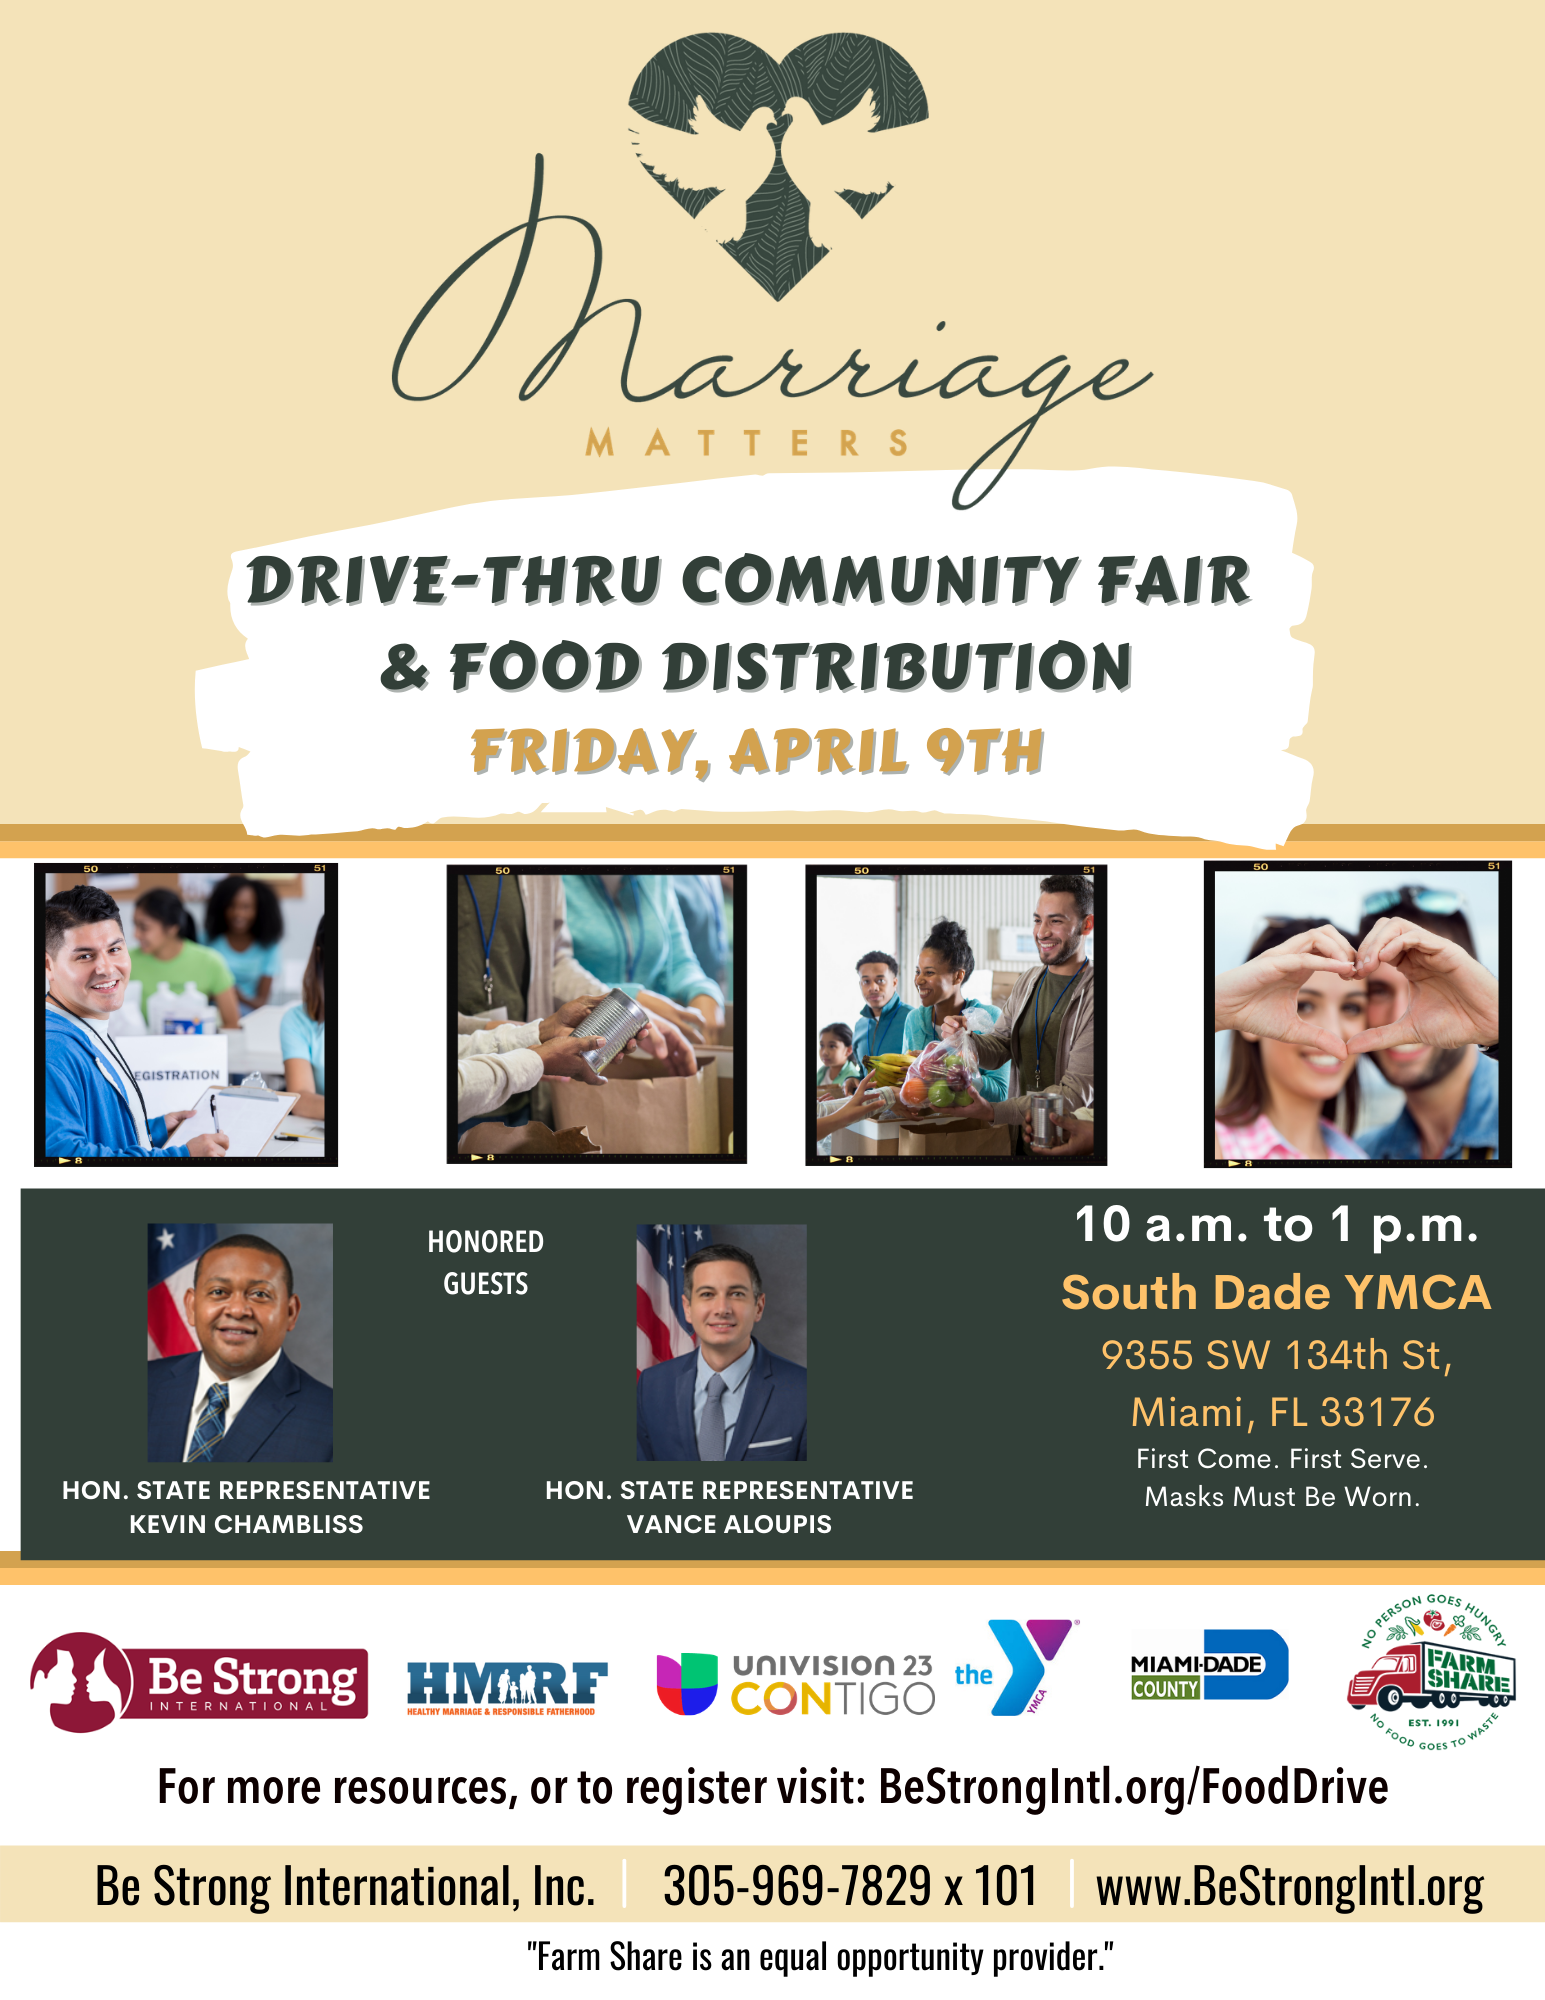 Be Strong International’s Marriage Matters Program to Host Drive-Thru Community Fair and Food Distribution Event